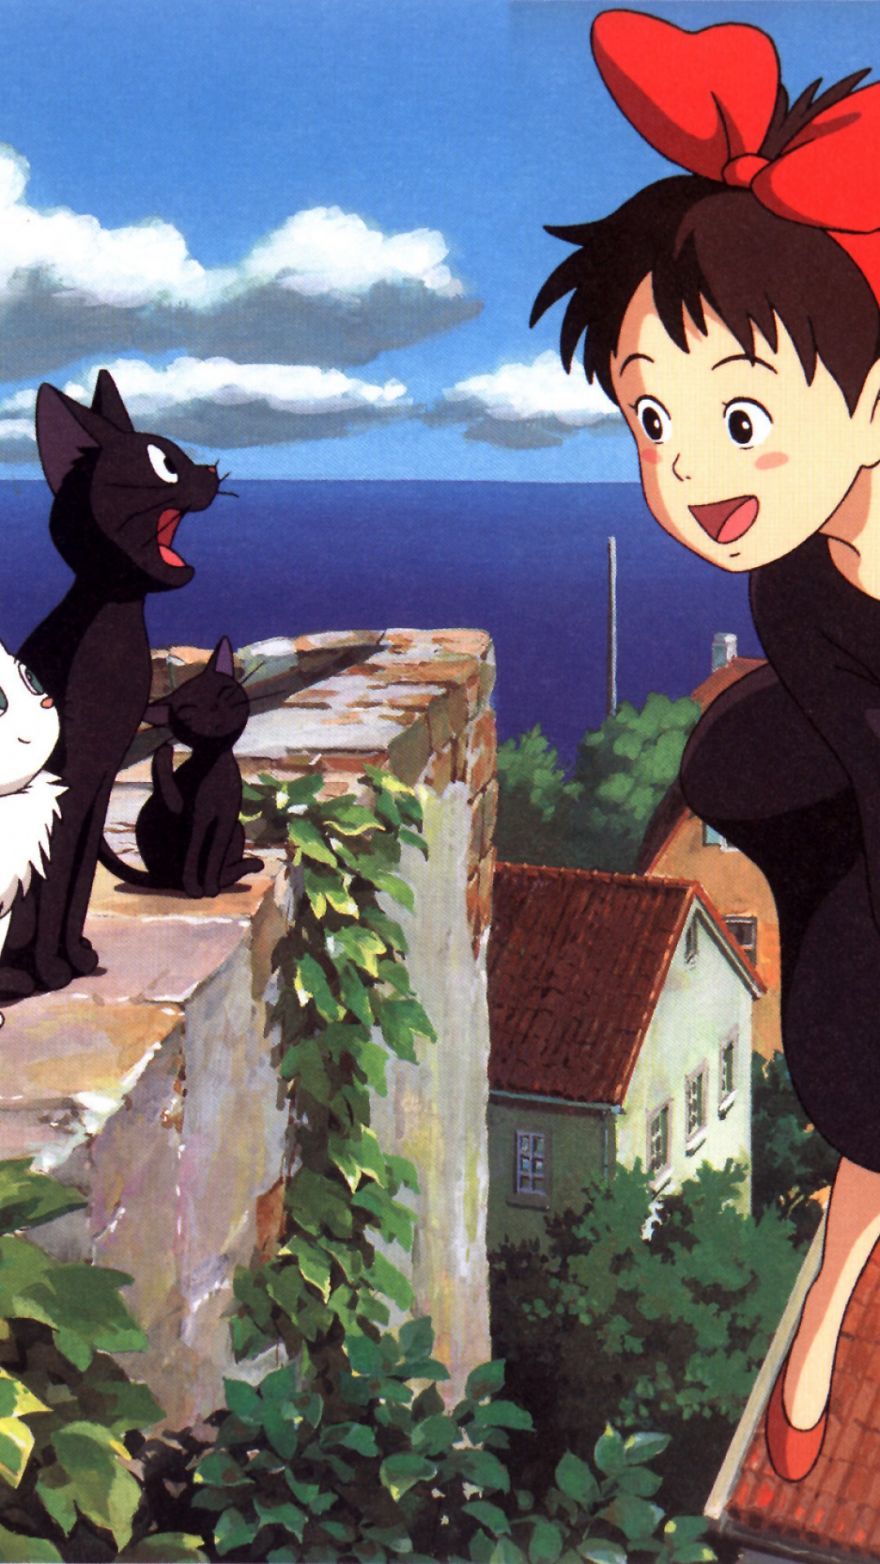 Celebrate The 31st Birthday Of Studio Ghibli With These 73 Wallpaper For Smartphones